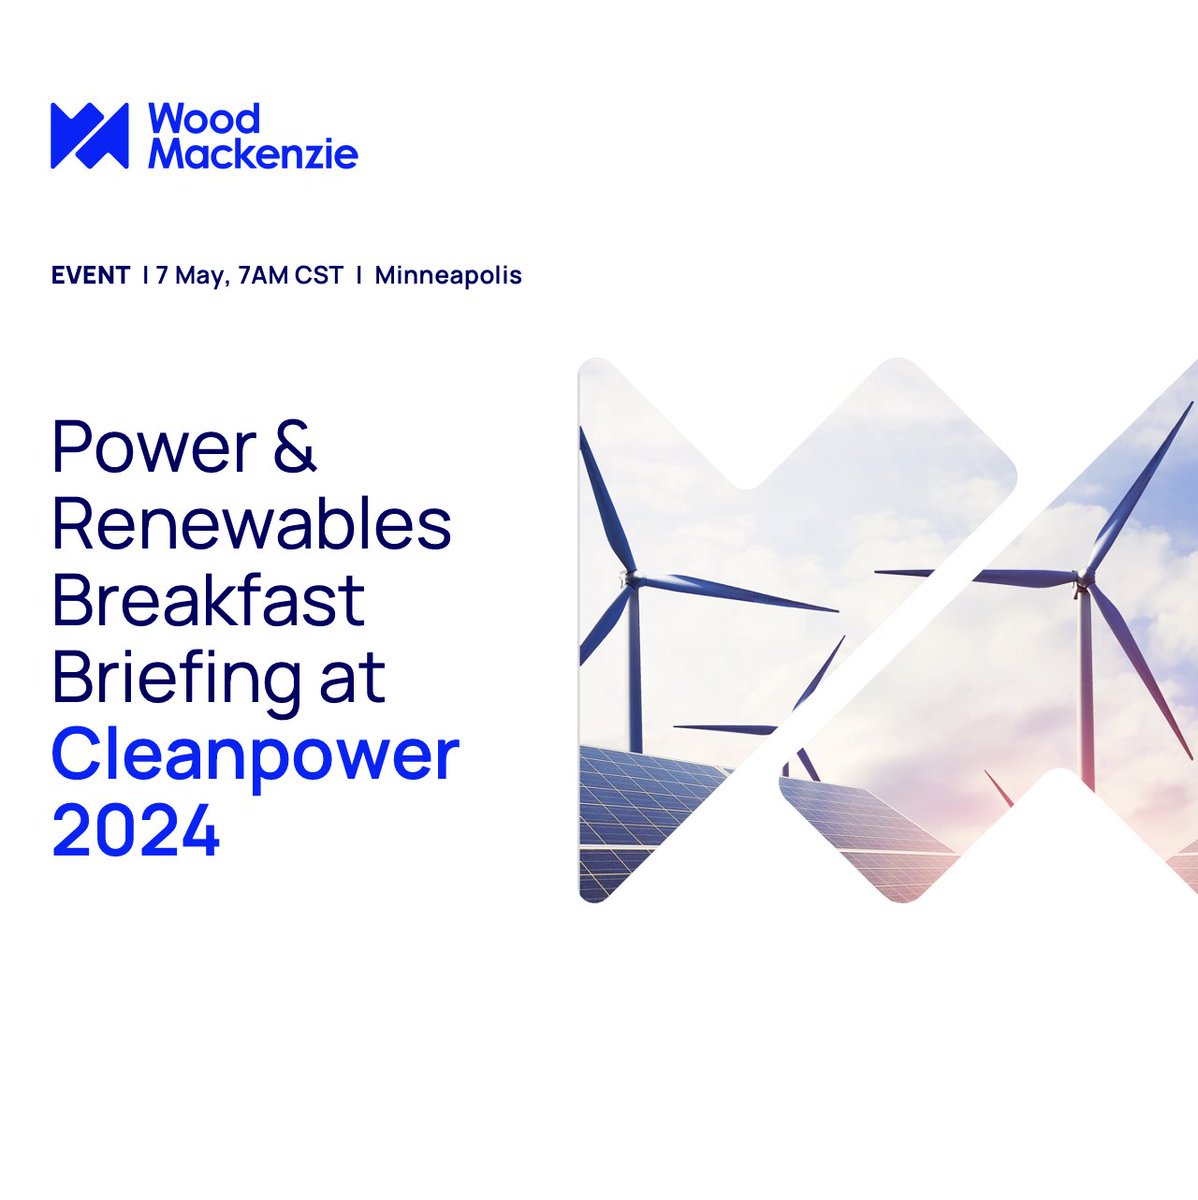 Secure your spot at our Power & Renewables breakfast briefing at Cleanpower next week! Don't miss the chance to gain insight into the latest developments and opportunities across the industry. okt.to/Ig4iqb